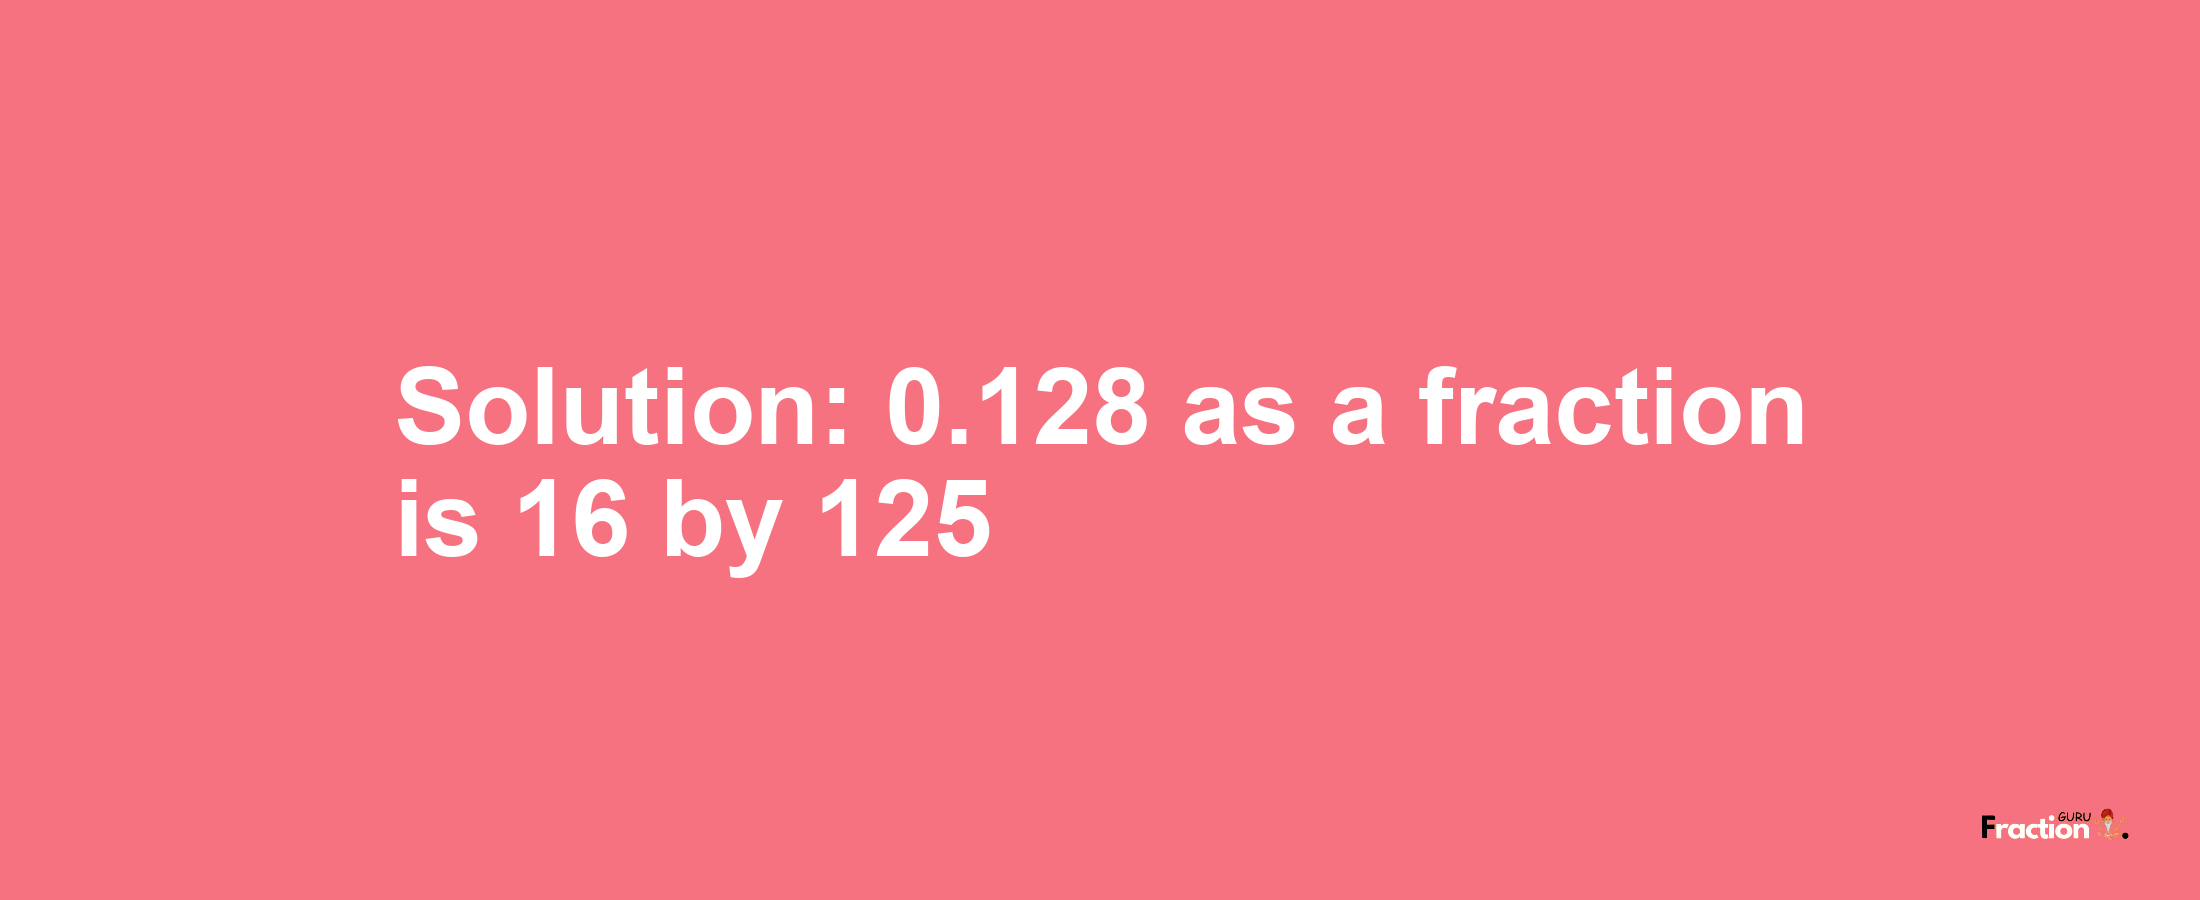 Solution:0.128 as a fraction is 16/125